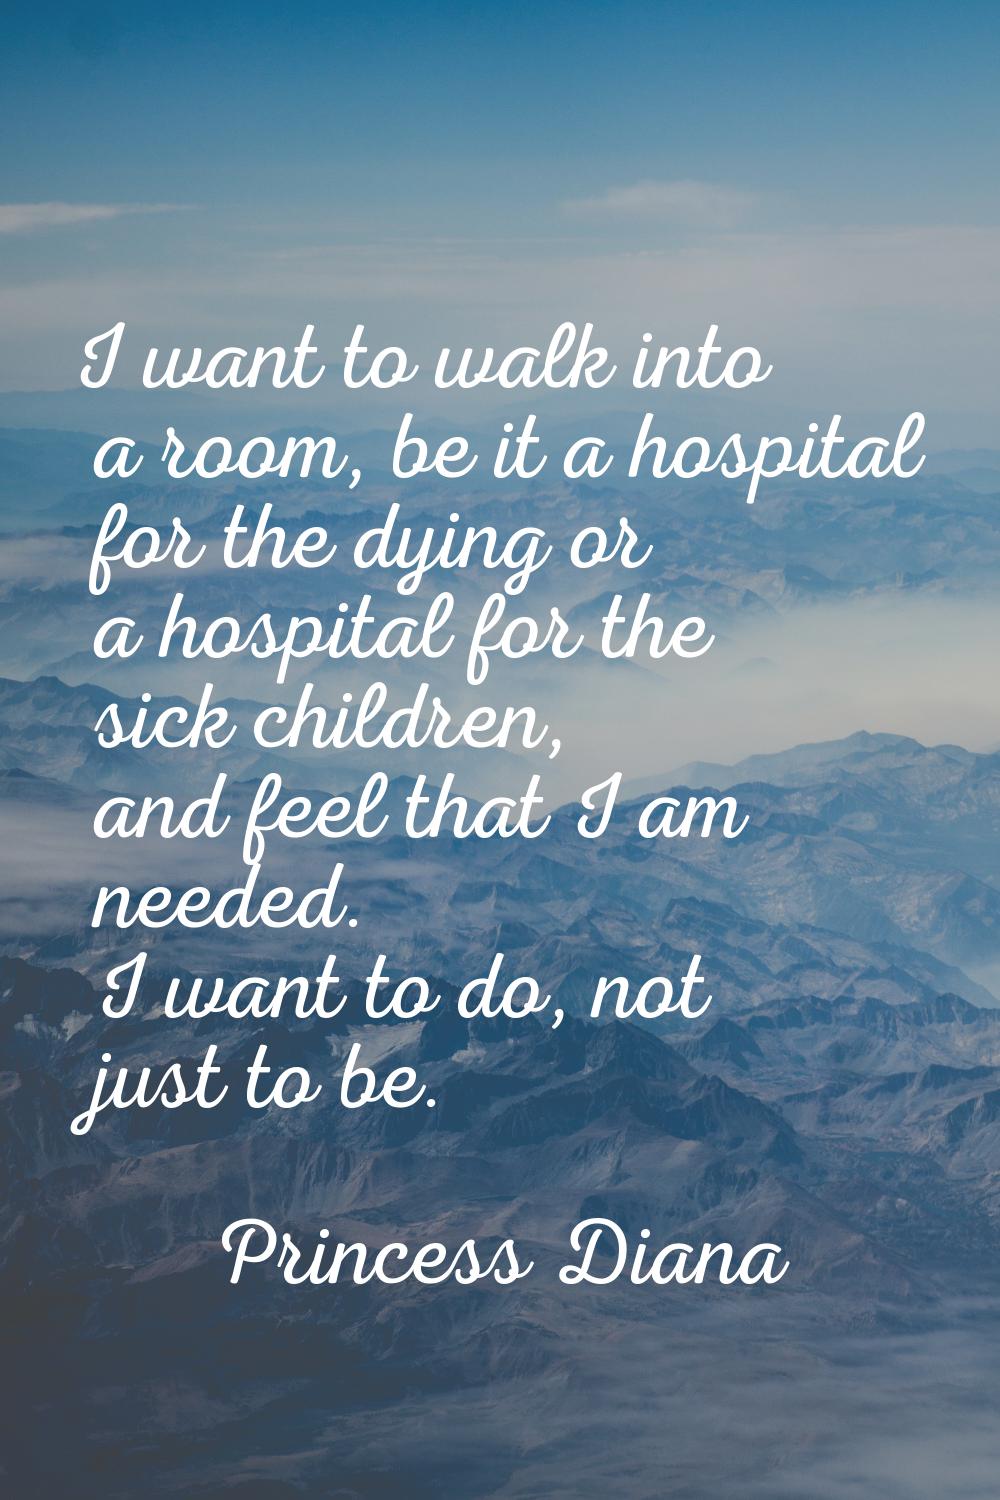 I want to walk into a room, be it a hospital for the dying or a hospital for the sick children, and